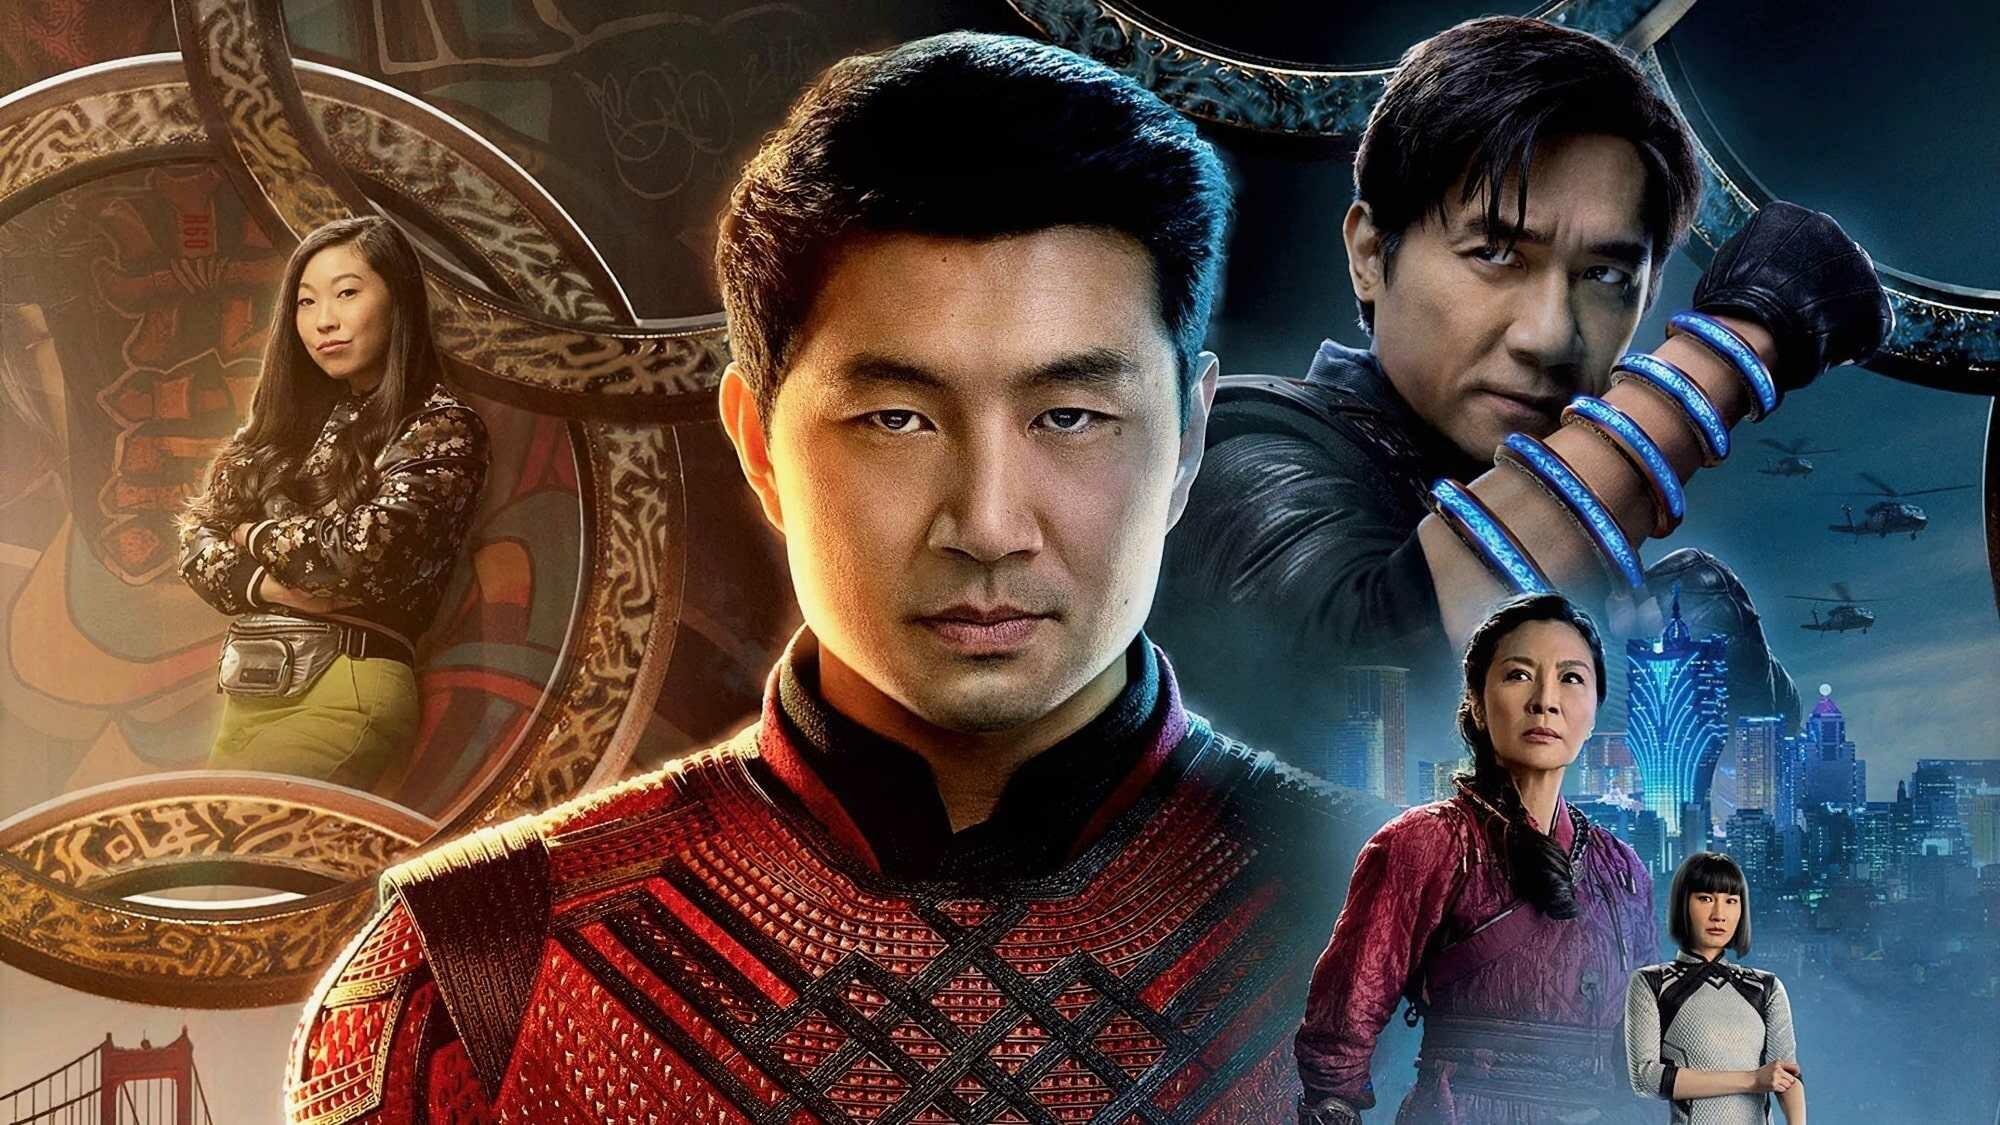 Shang-Chi and the Legend of the Ten Rings: Marvel's first movie with a predominantly Asian cast has been a hit with global audiences. 2000x1130 HD Wallpaper.